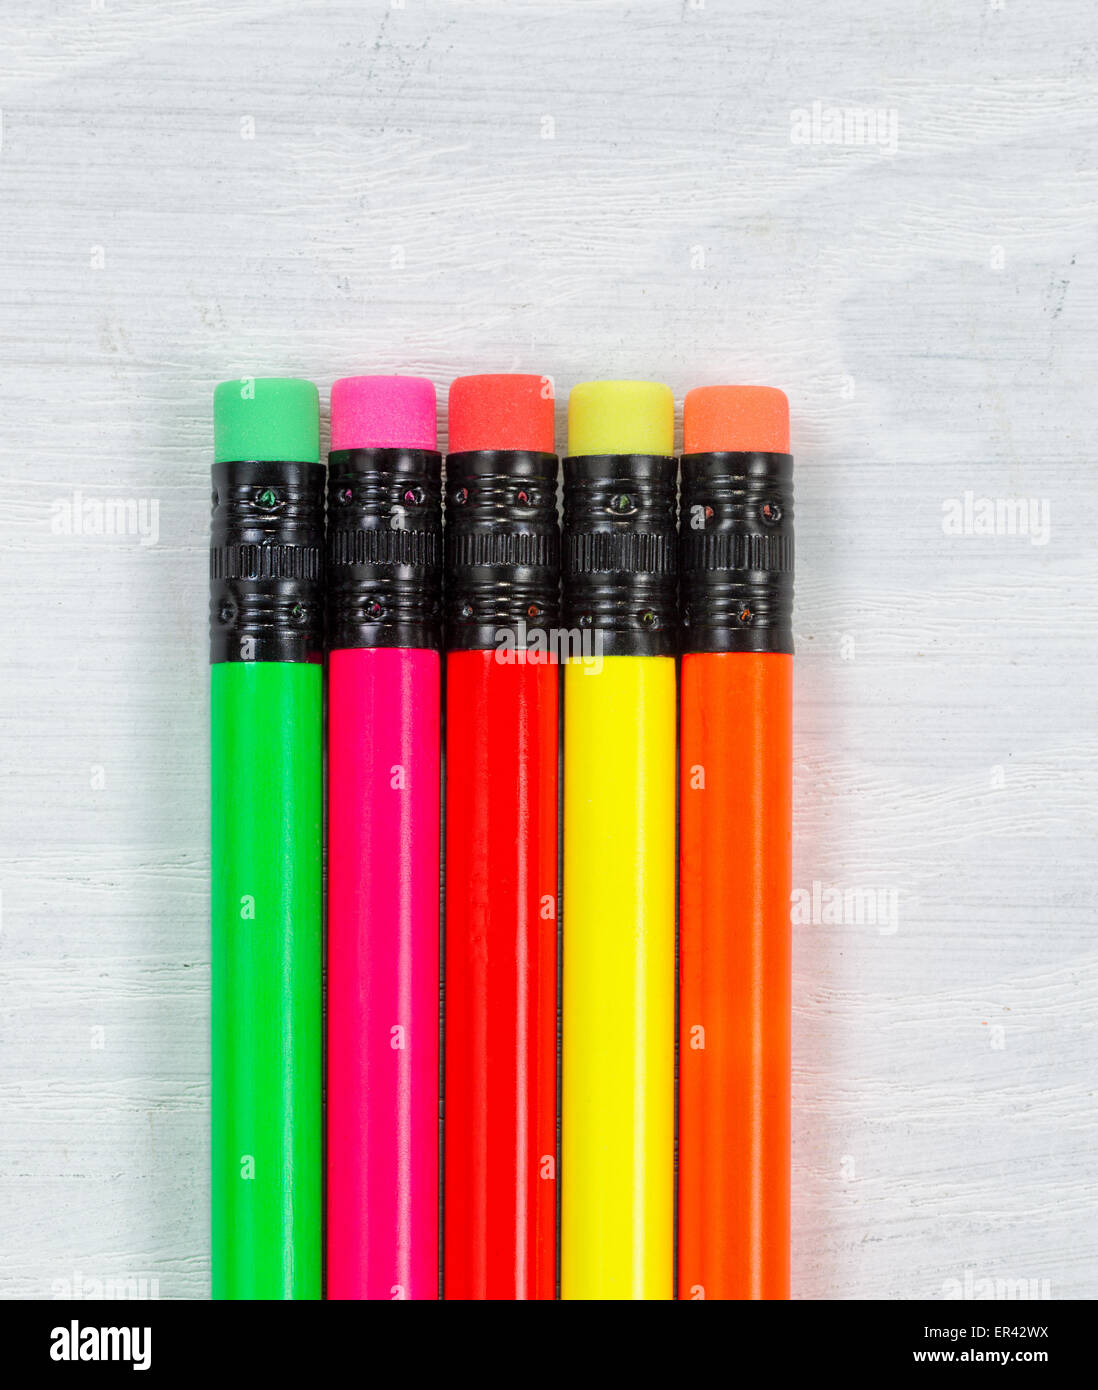 Close up of colorful pencil tip erasers on white desktop. Layout in vertical format. Stock Photo